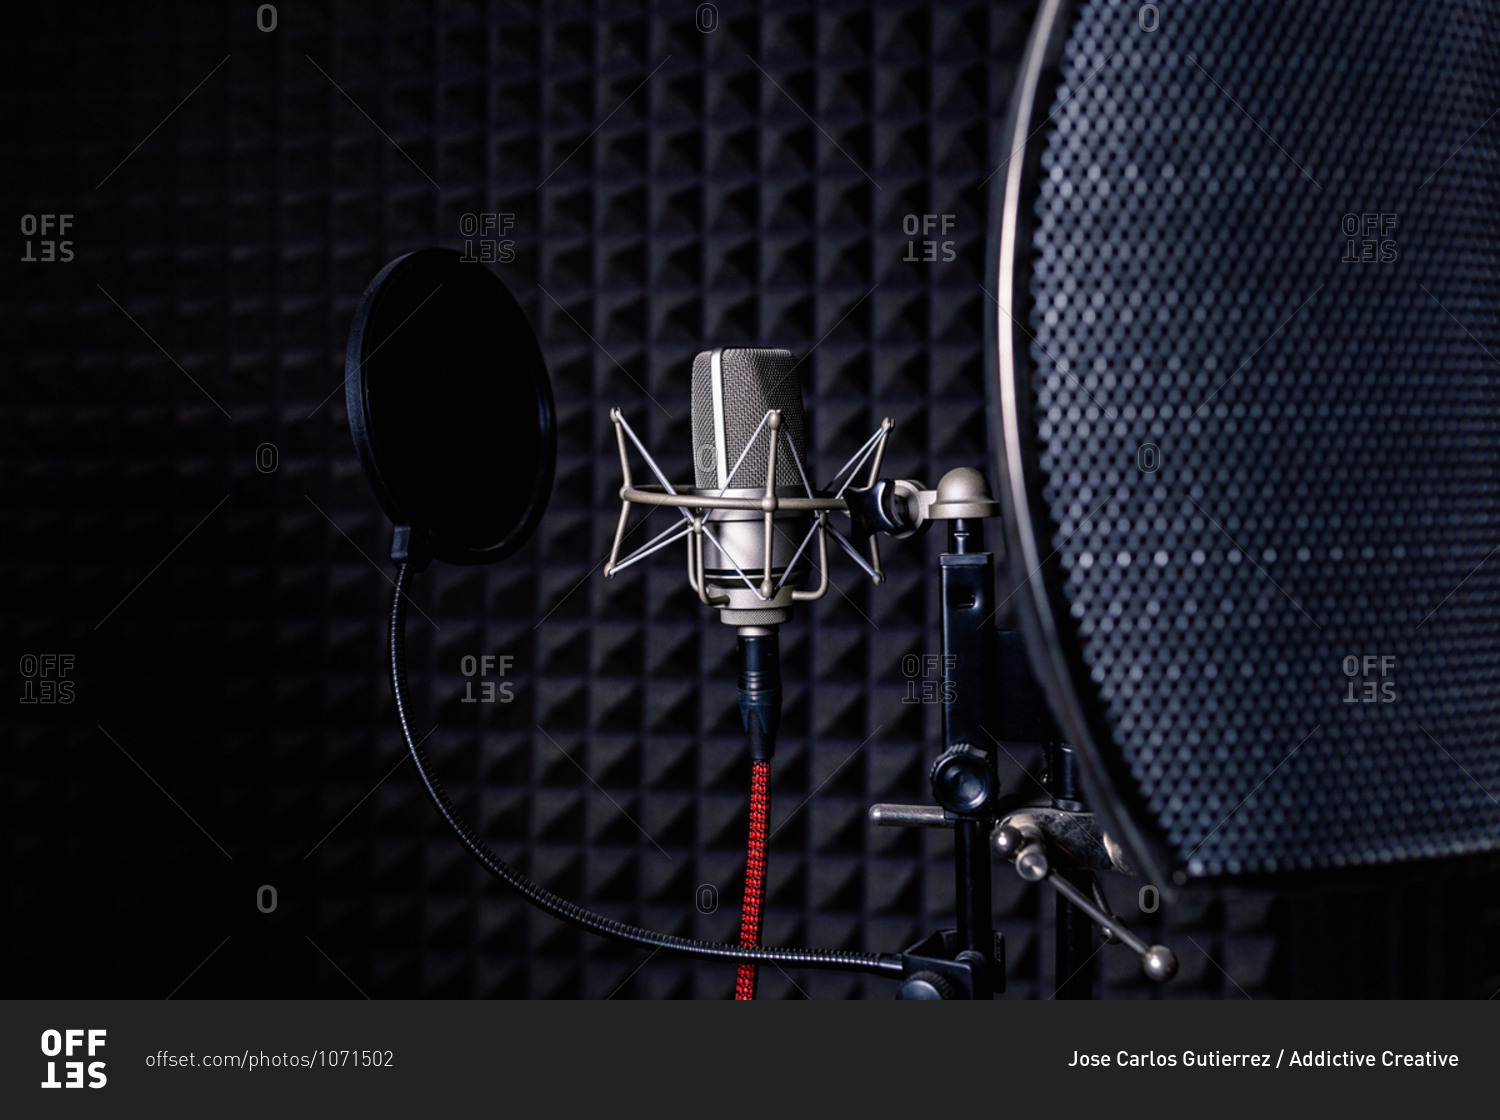 Contemporary metal microphone with wire placed on background of soundproof foam with pyramid shaped pattern in dark music recording studio